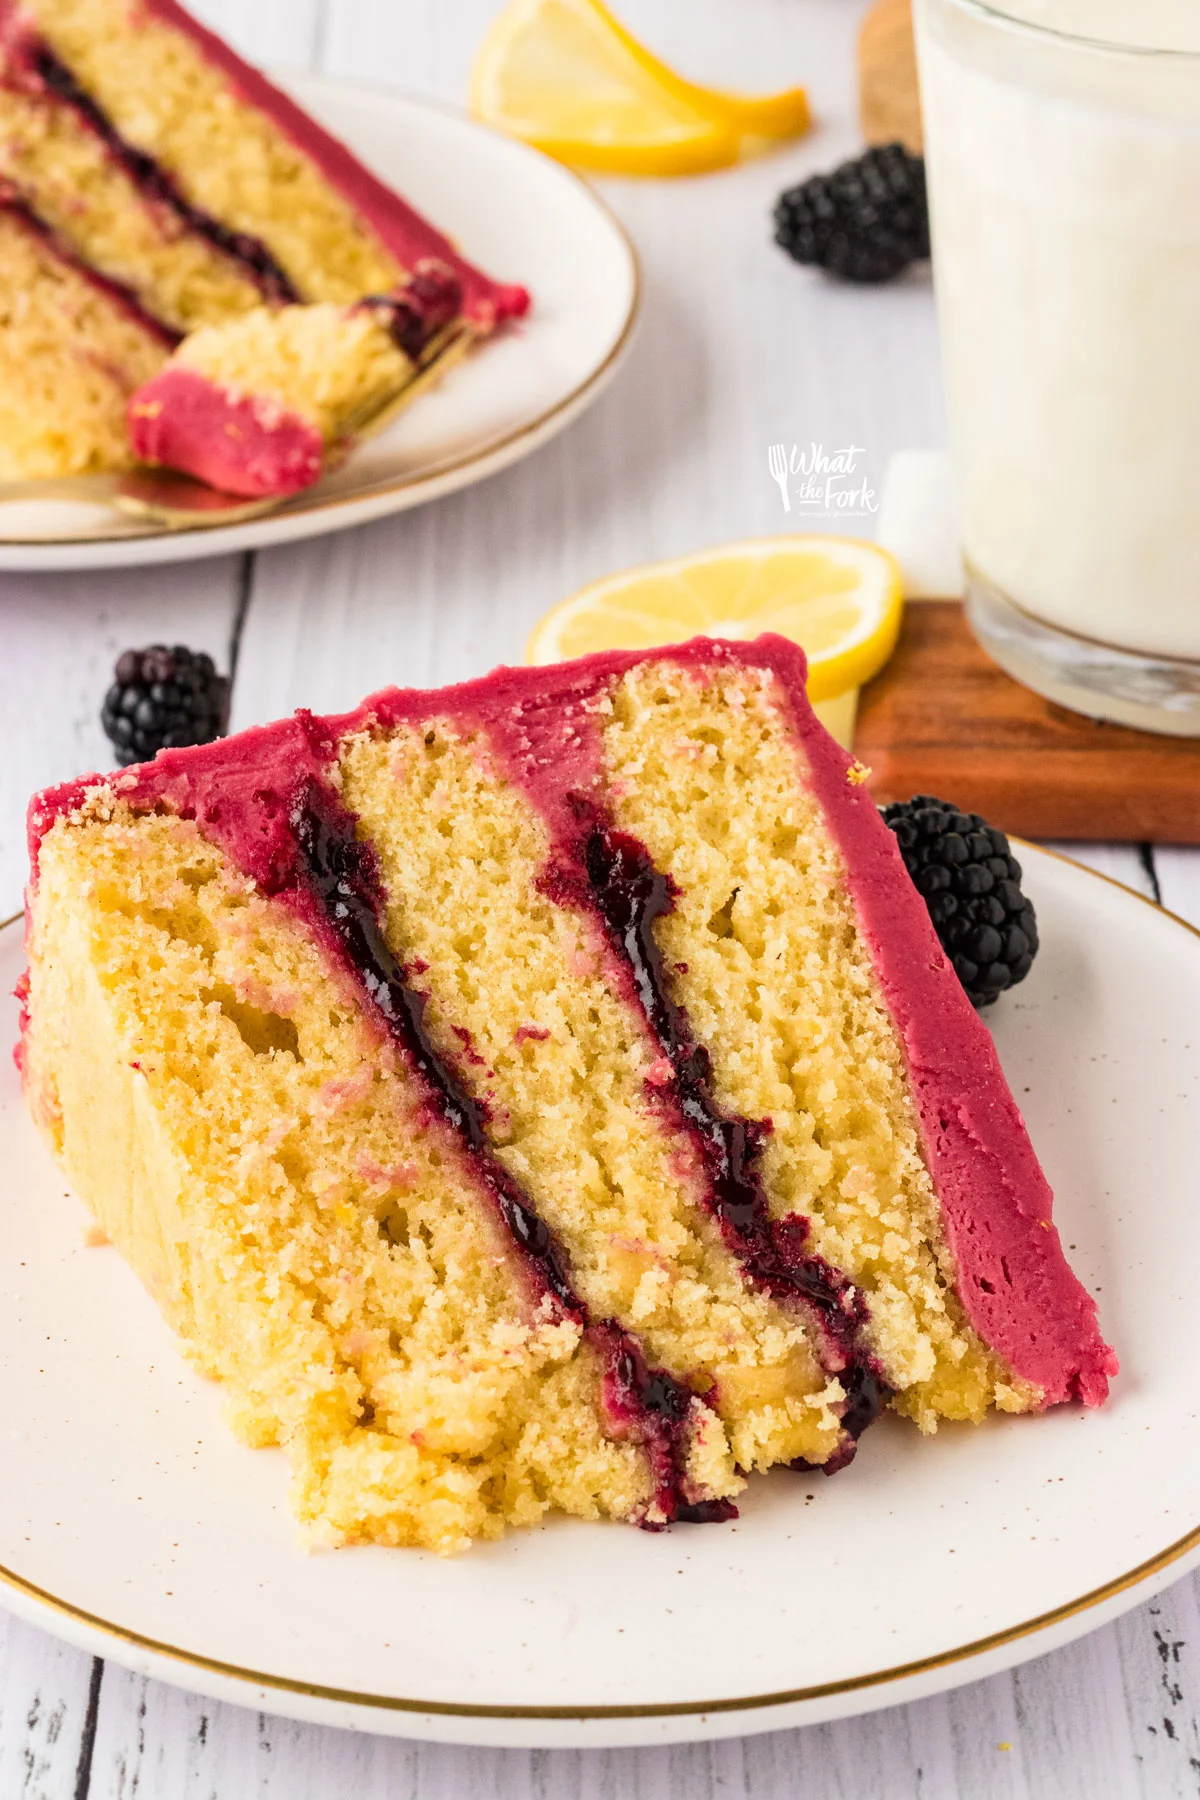 a slice of Gluten Free Lemon Blackberry Cake  on a stack of round white plates